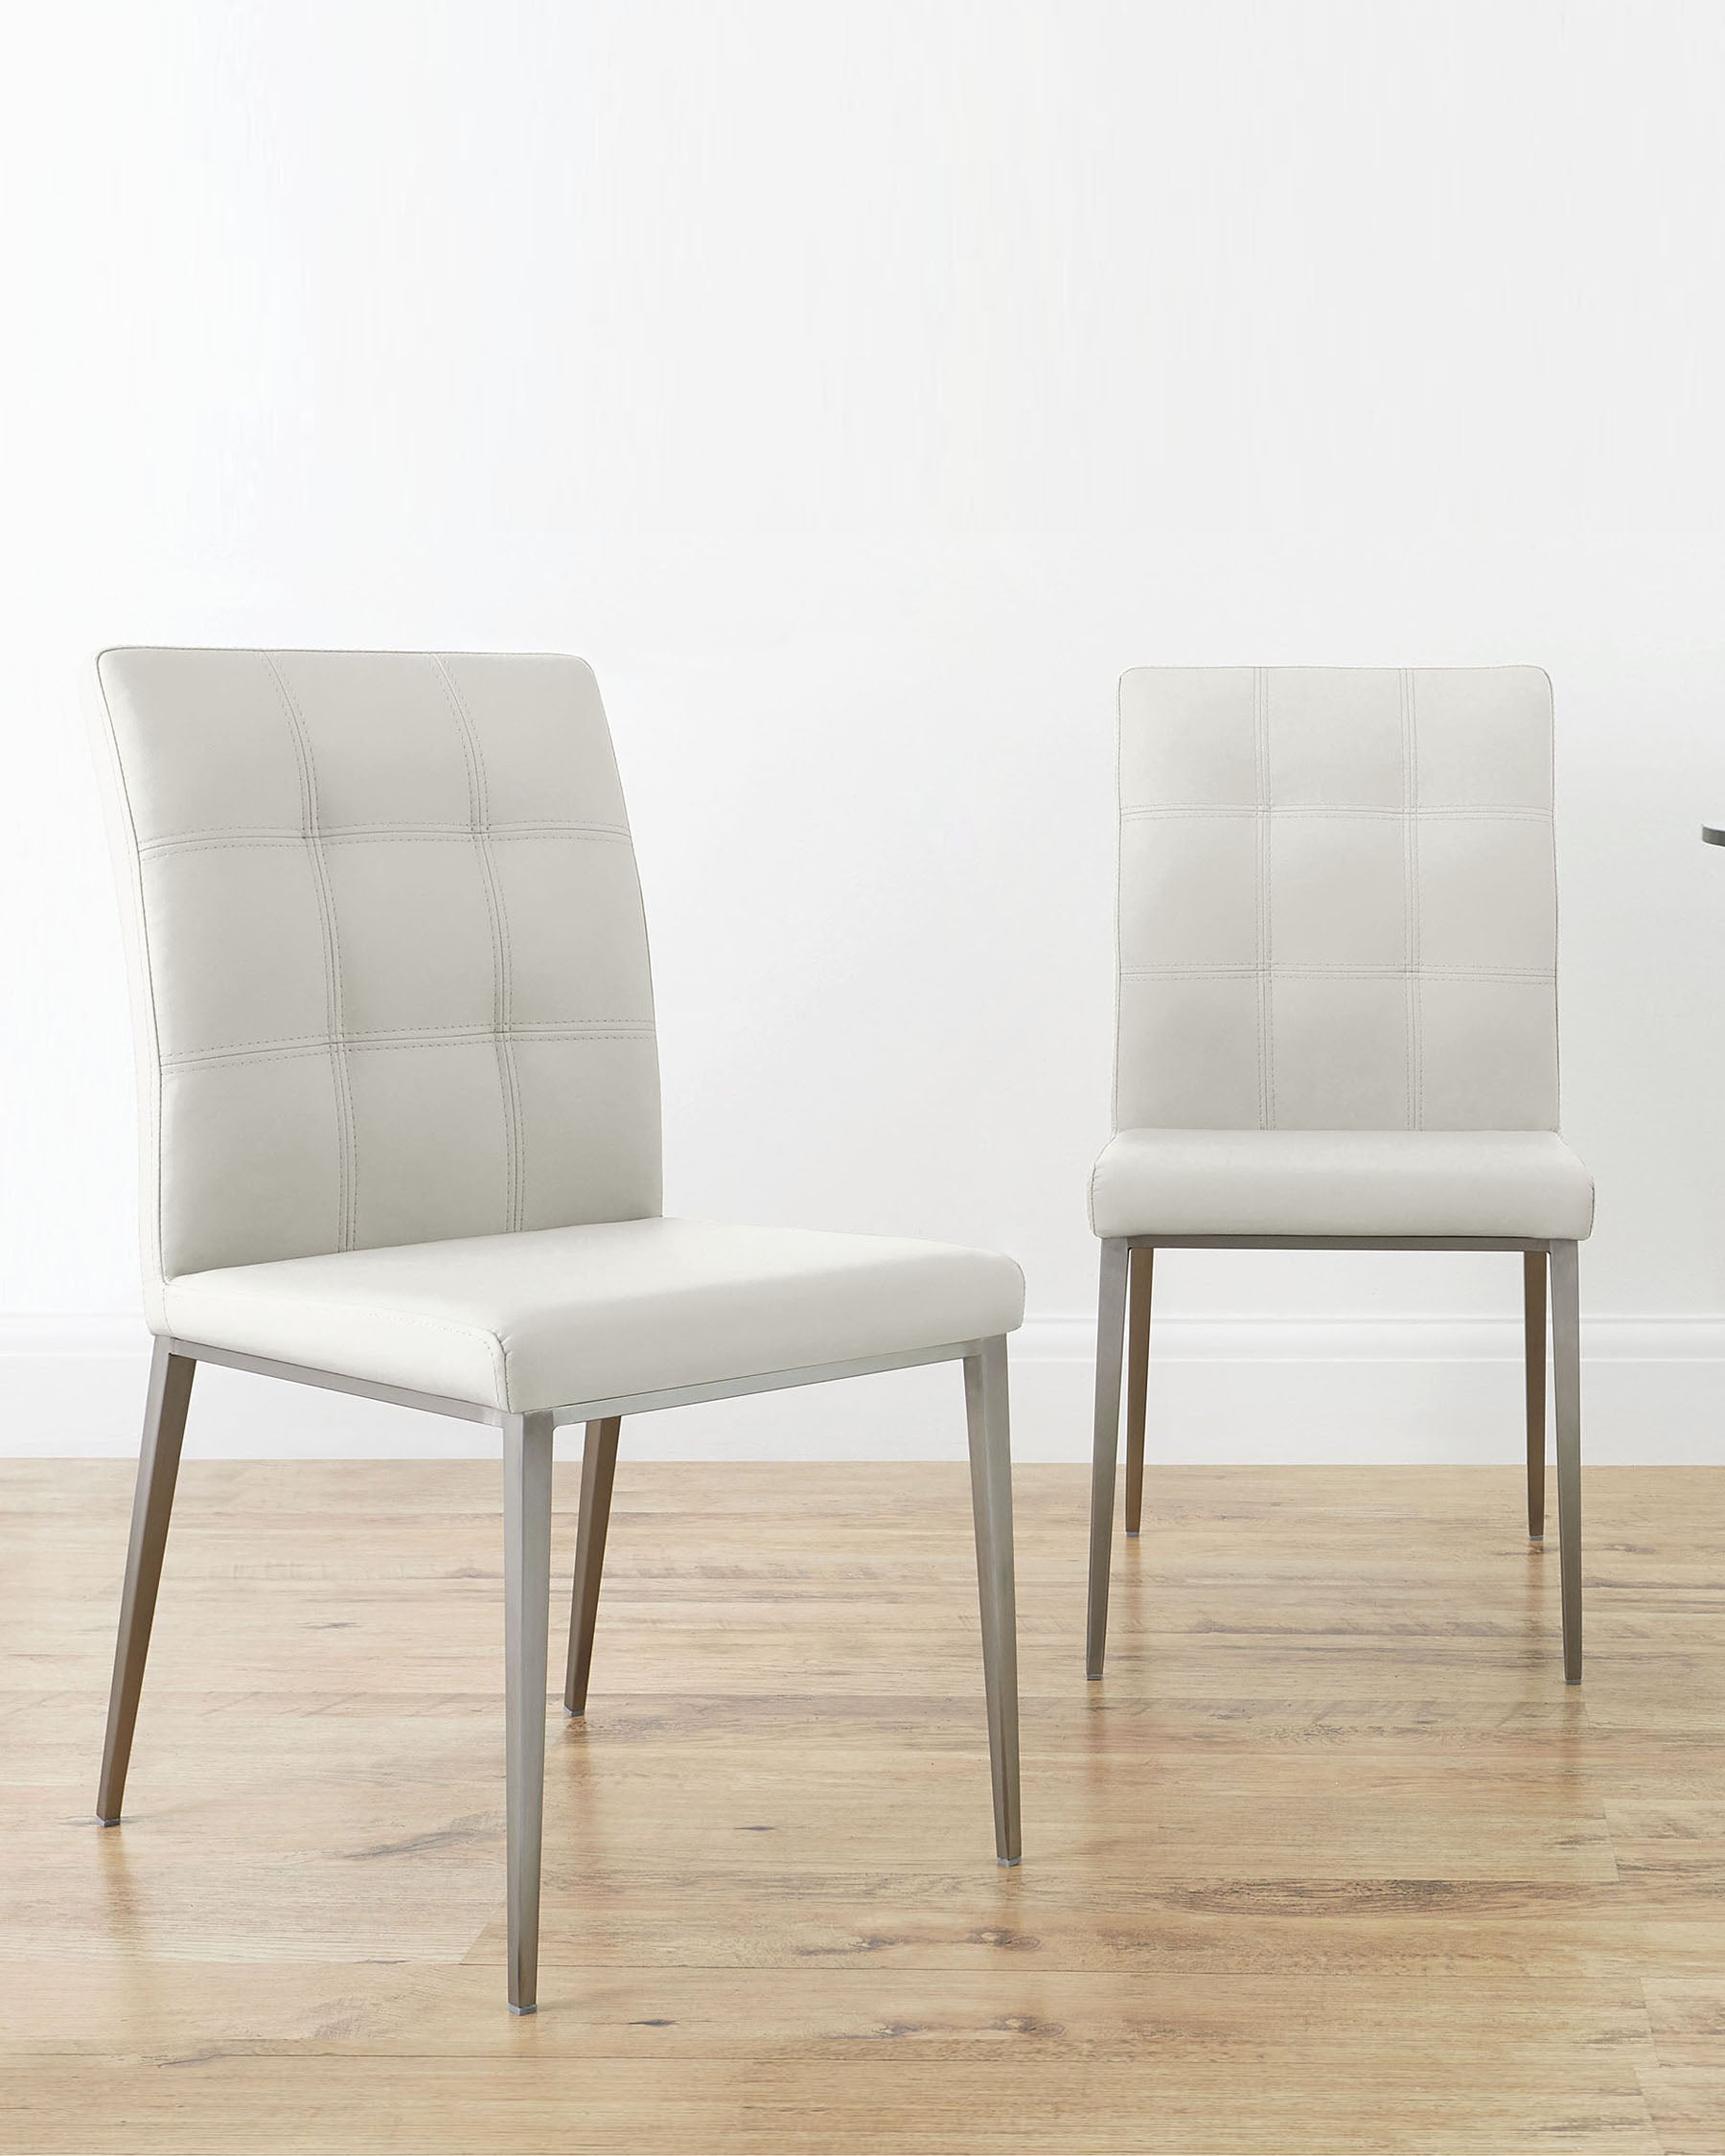 Moda Faux Leather Brushed Steel Dining Chairs Danetti